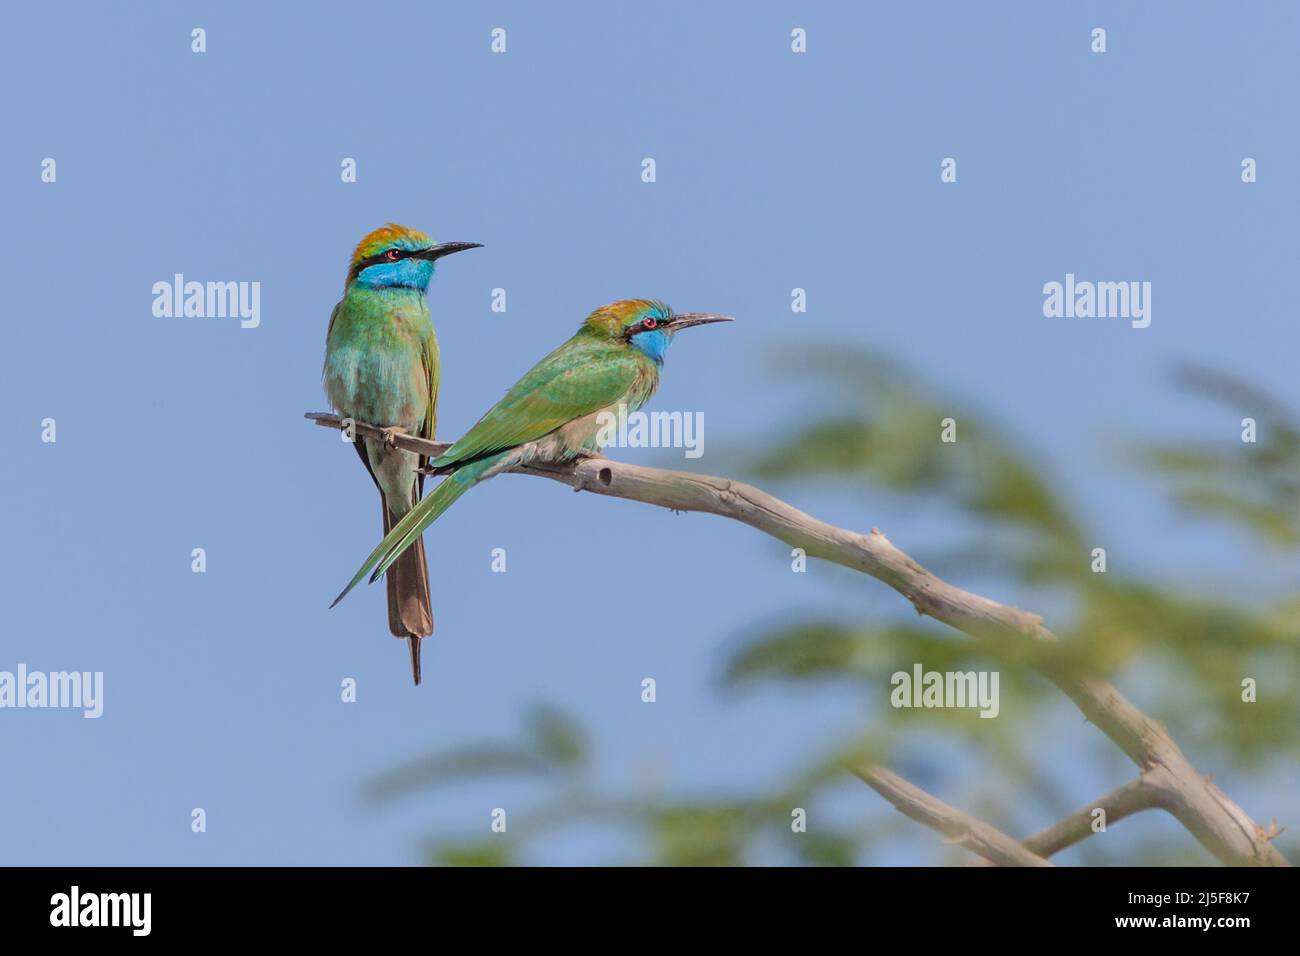 A pair of Arabian green bee-eaters (Merops cyanophrys) in the Al Wasit Wetland Nature Reserve in Sharjah in the United Arab Emirates. Stock Photo